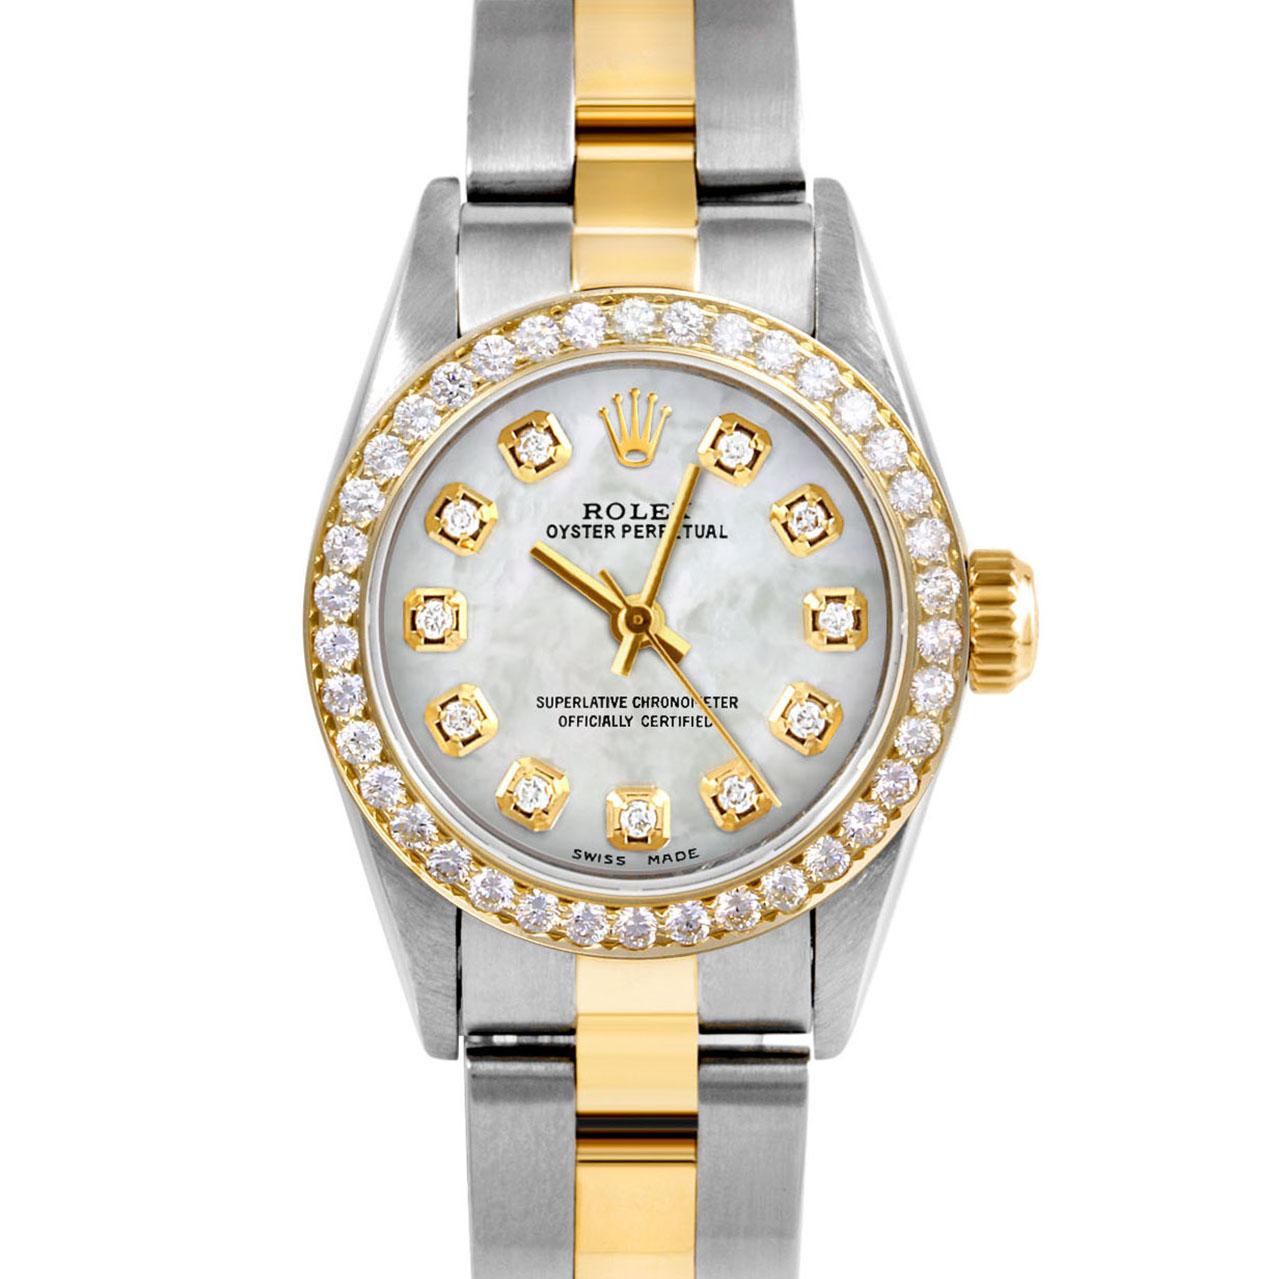 Brand : Rolex
Model : Oyster Perpetual 
Gender : Ladies
Metals : 14K Yellow Gold / Stainless Steel
Case Size : 24 mm
Dial : Custom Mother Of Pearl Diamond Dial (This dial is not original Rolex And has been added aftermarket yet is a beautiful Custom